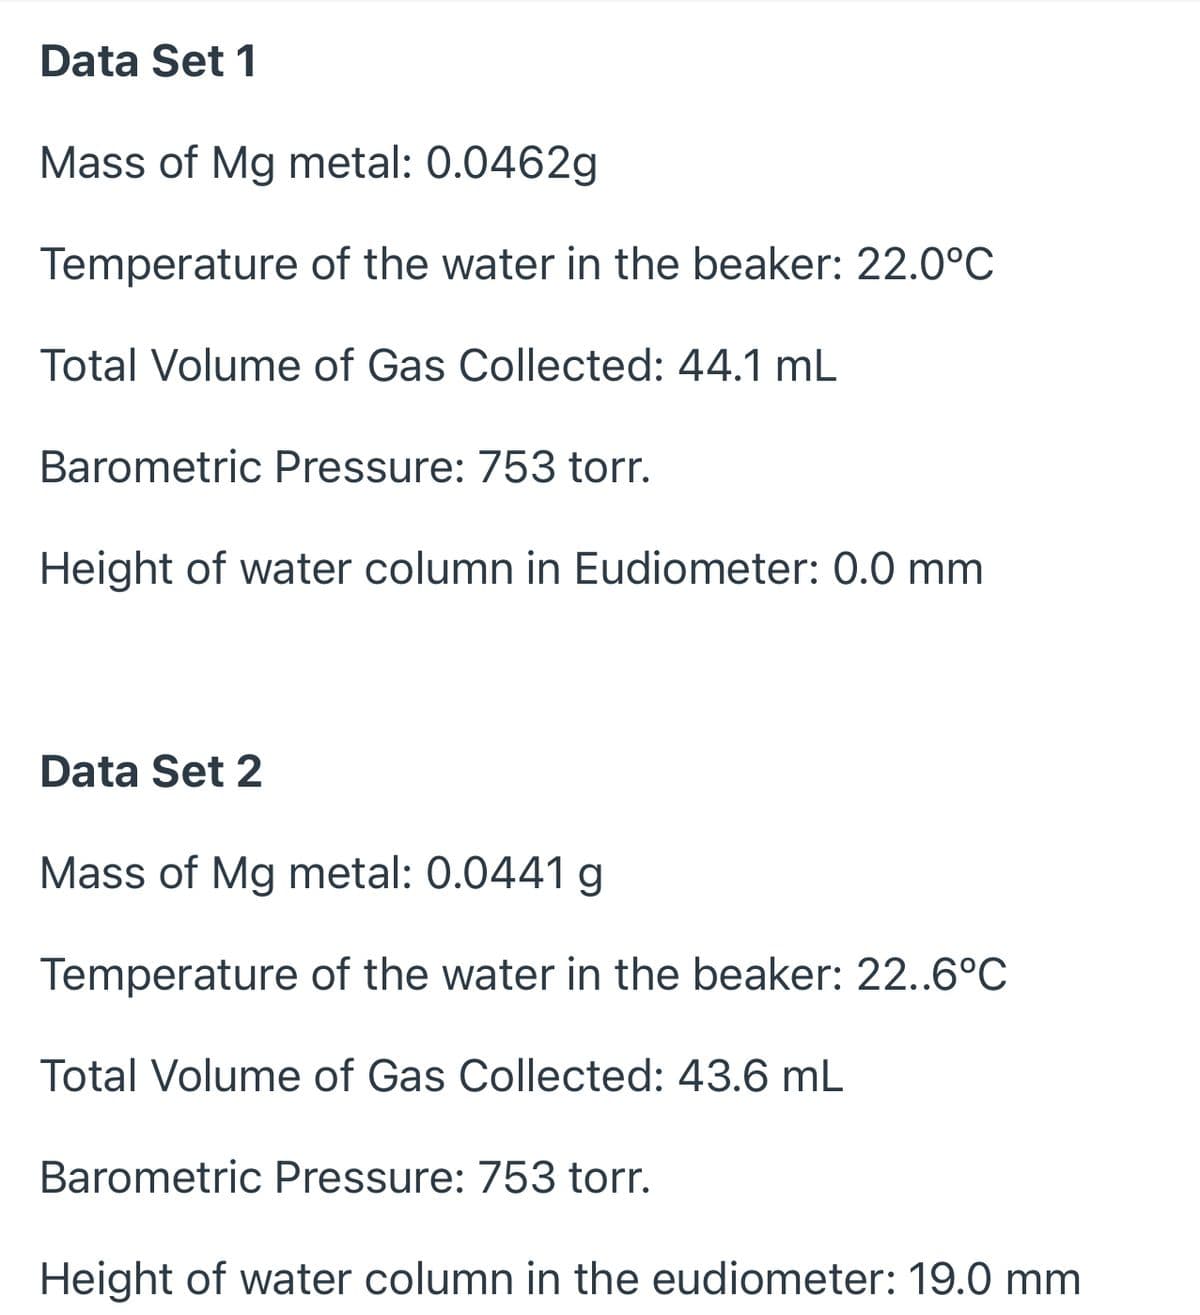 Data Set 1
Mass of Mg metal: 0.0462g
Temperature of the water in the beaker: 22.0°C
Total Volume of Gas Collected: 44.1 mL
Barometric Pressure: 753 torr.
Height of water column in Eudiometer: 0.0 mm
Data Set 2
Mass of Mg metal: 0.0441 g
Temperature of the water in the beaker: 22..6°C
Total Volume of Gas Collected: 43.6 mL
Barometric Pressure: 753 torr.
Height of water column in the eudiometer: 19.0 mm
